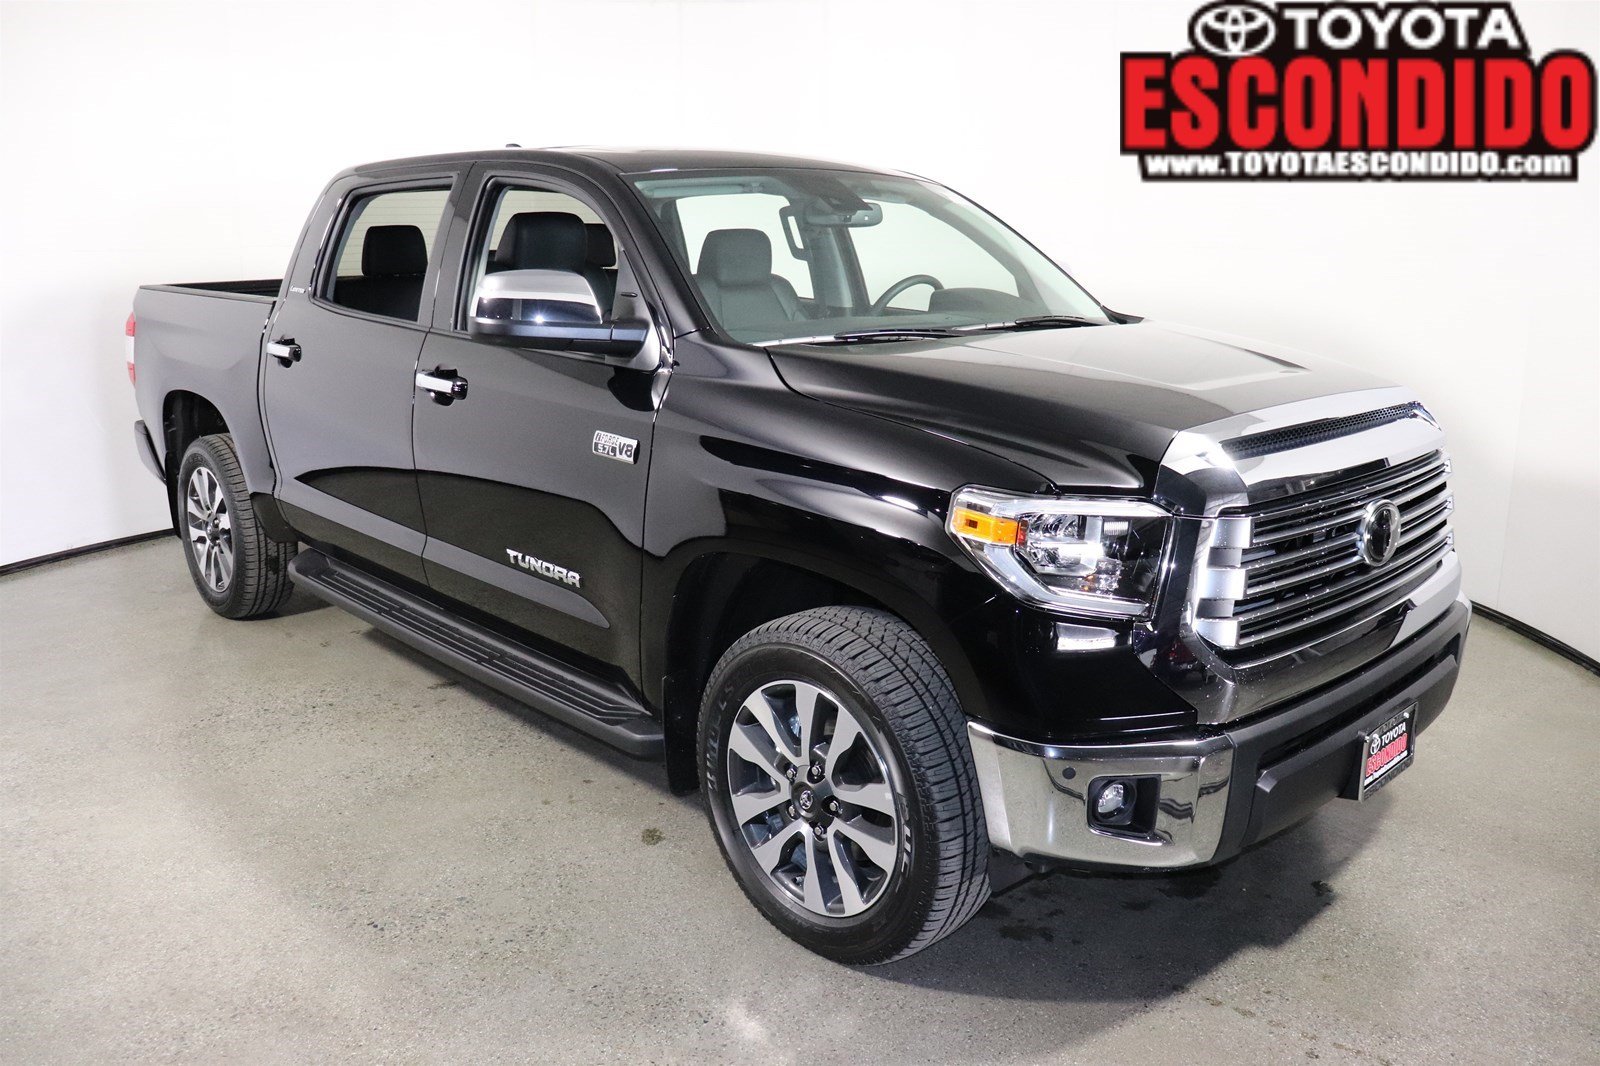 New 2020 Toyota TUNDRA Limited CrewMax Pickup in Escondido #1026597